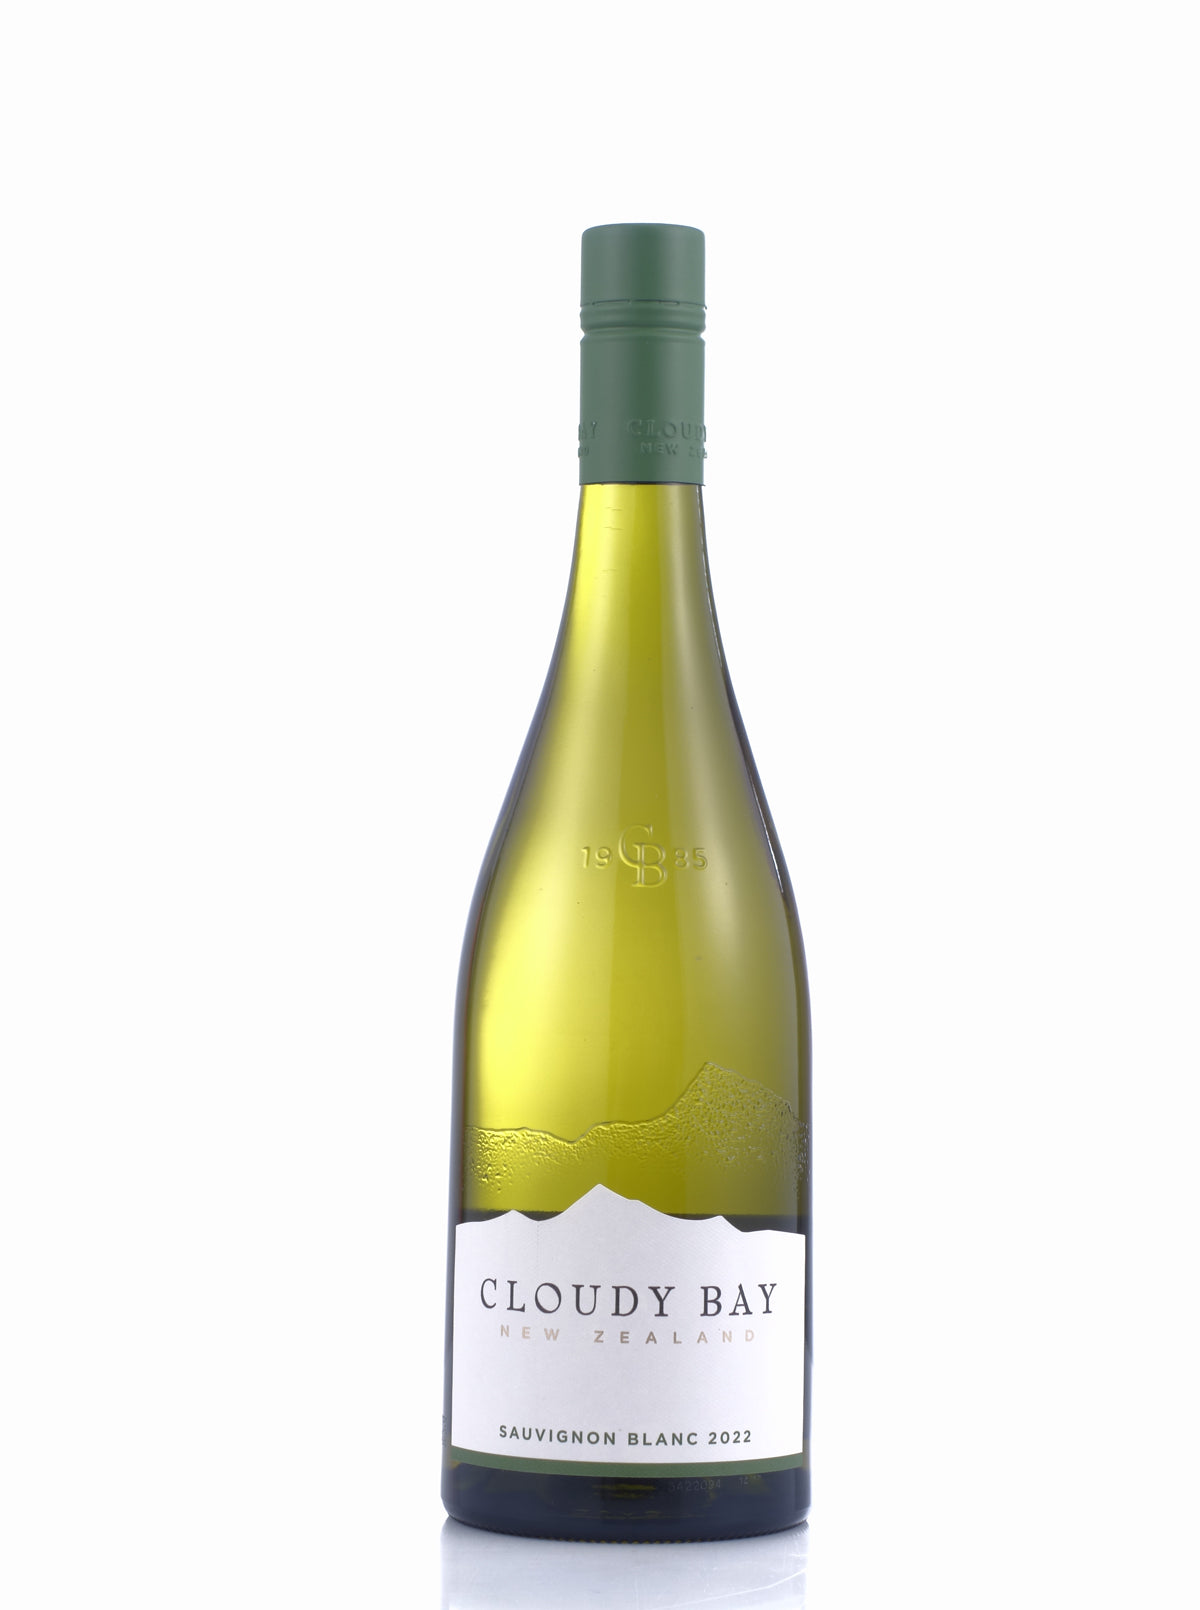 Cloudy Bay Sauvignon Blanc From New Zealand 2022